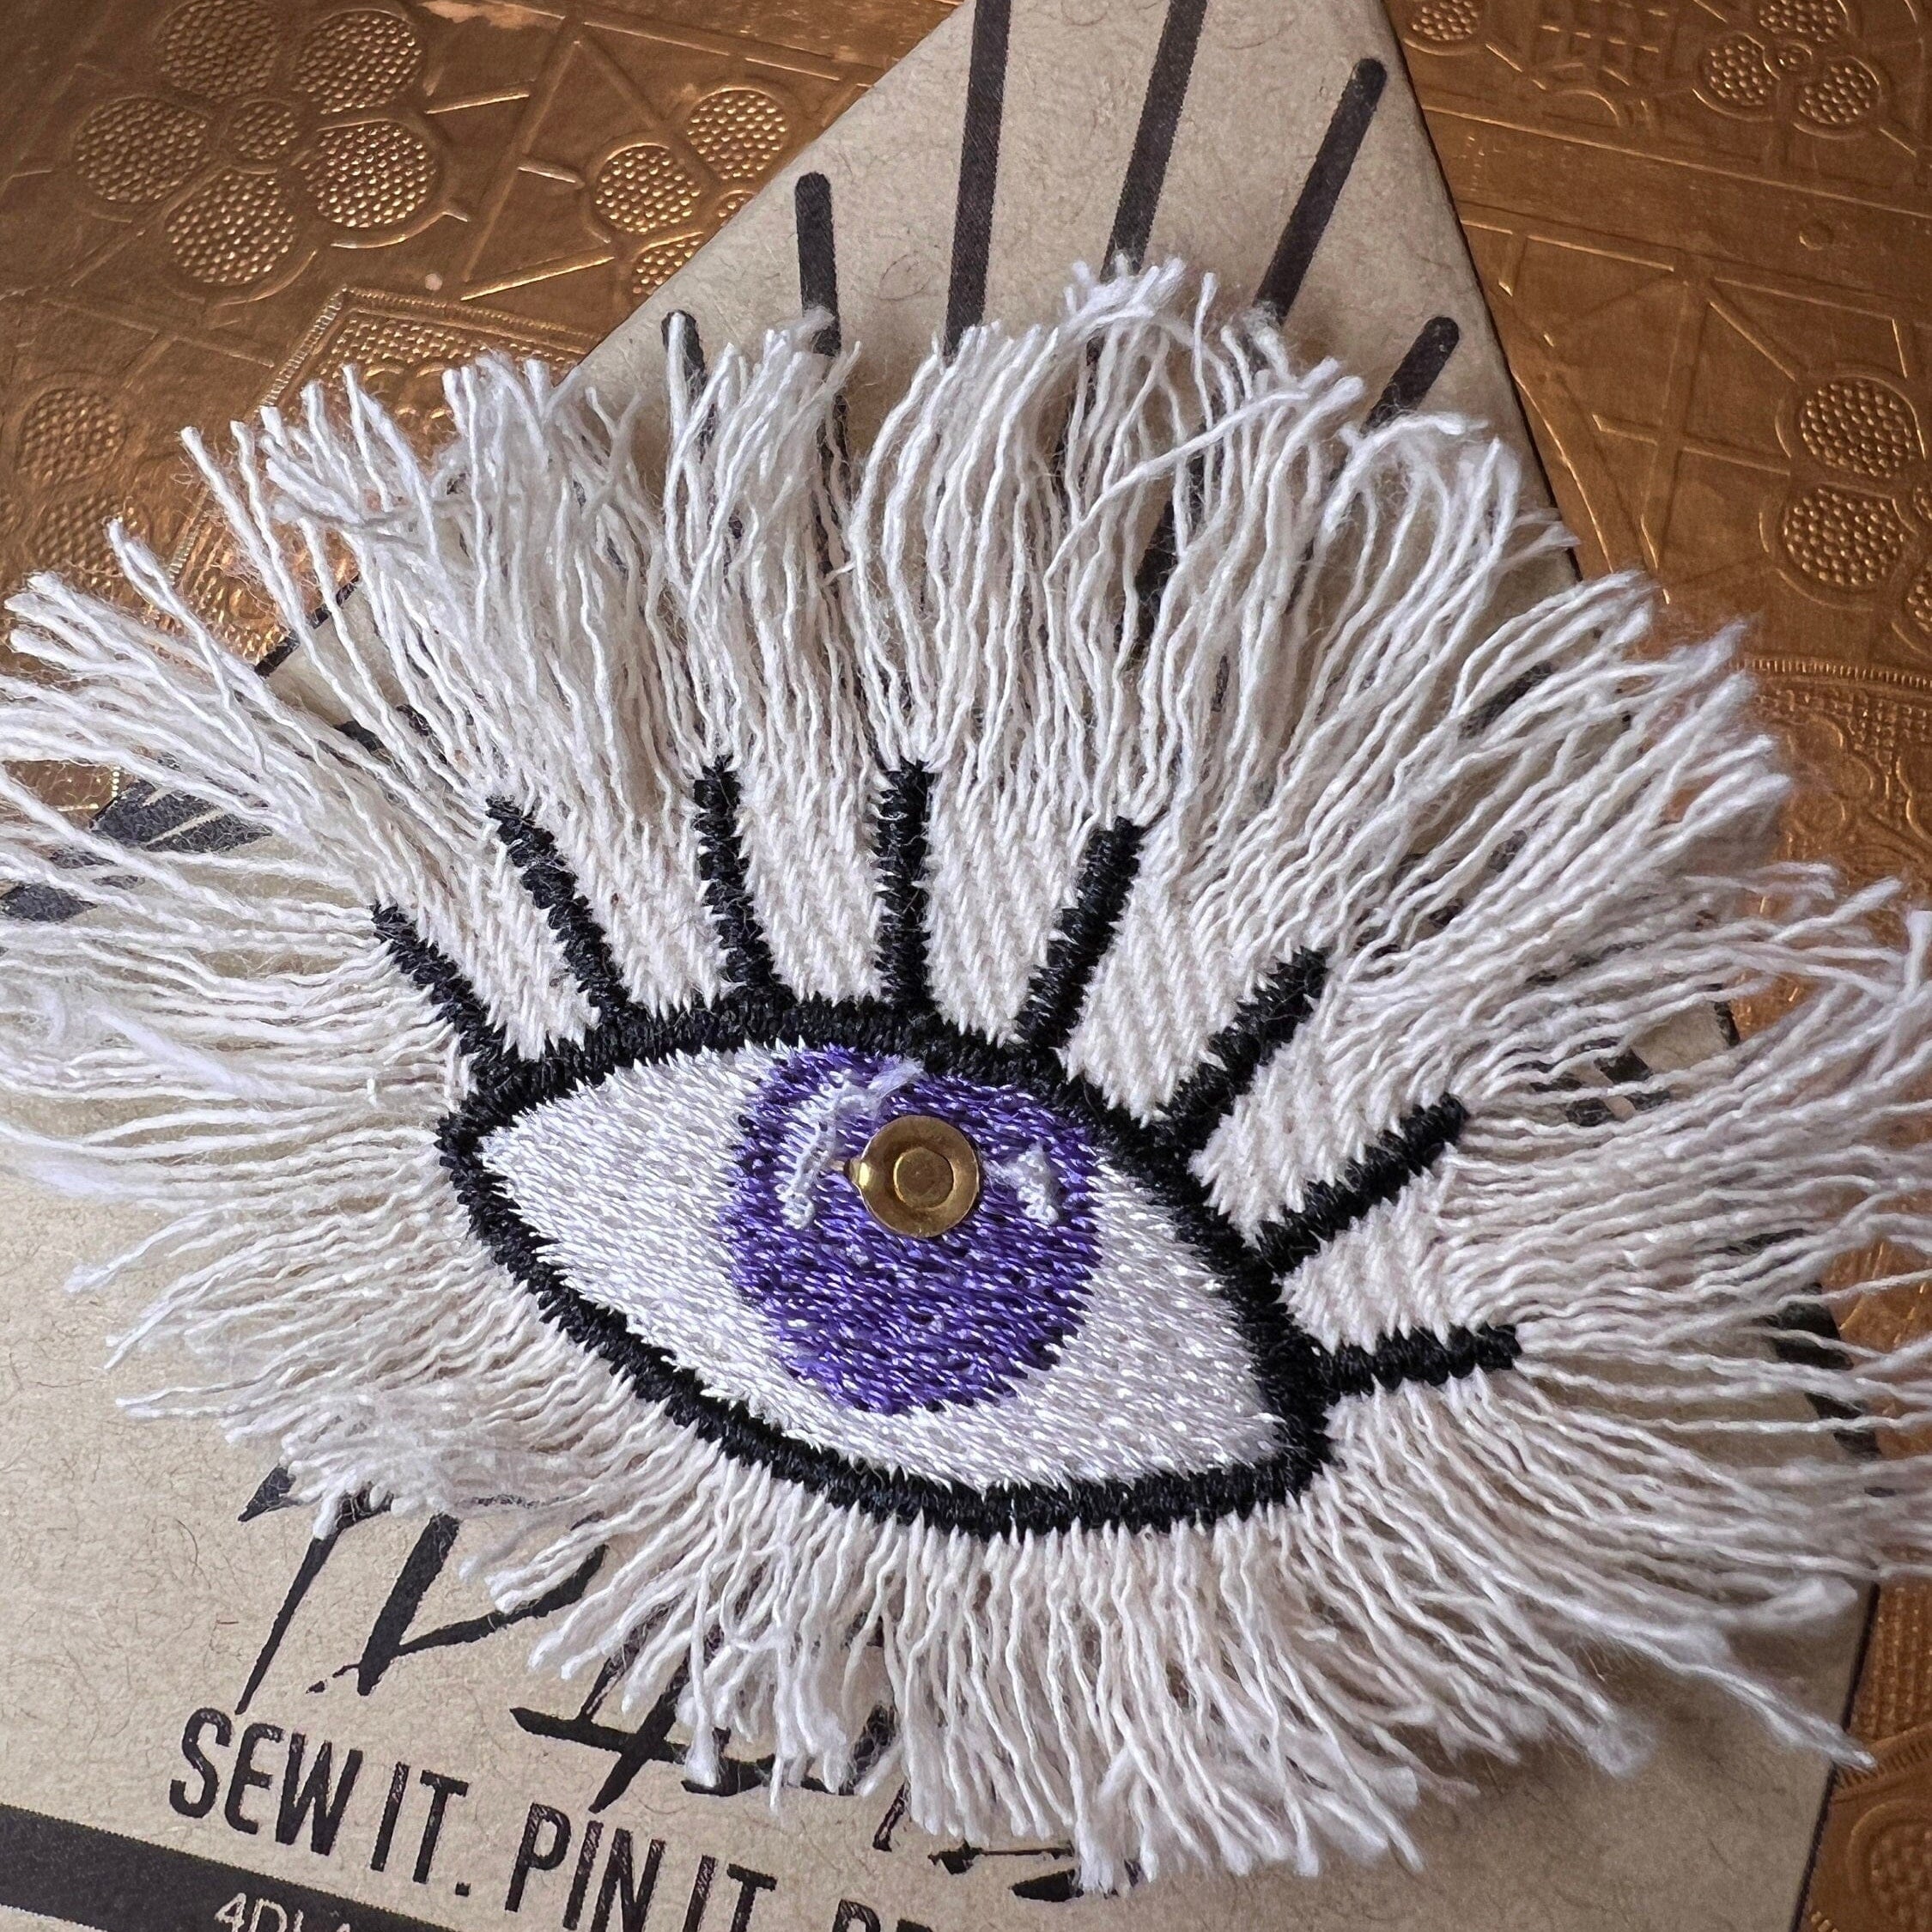 Purple Evil EYE Patch Destroyed Shredded Denim GOOD KARMA Handmade Embroidery Protect Talisman Decal Bridal Party Bachelorette office gift Brooches & Lapel Pins